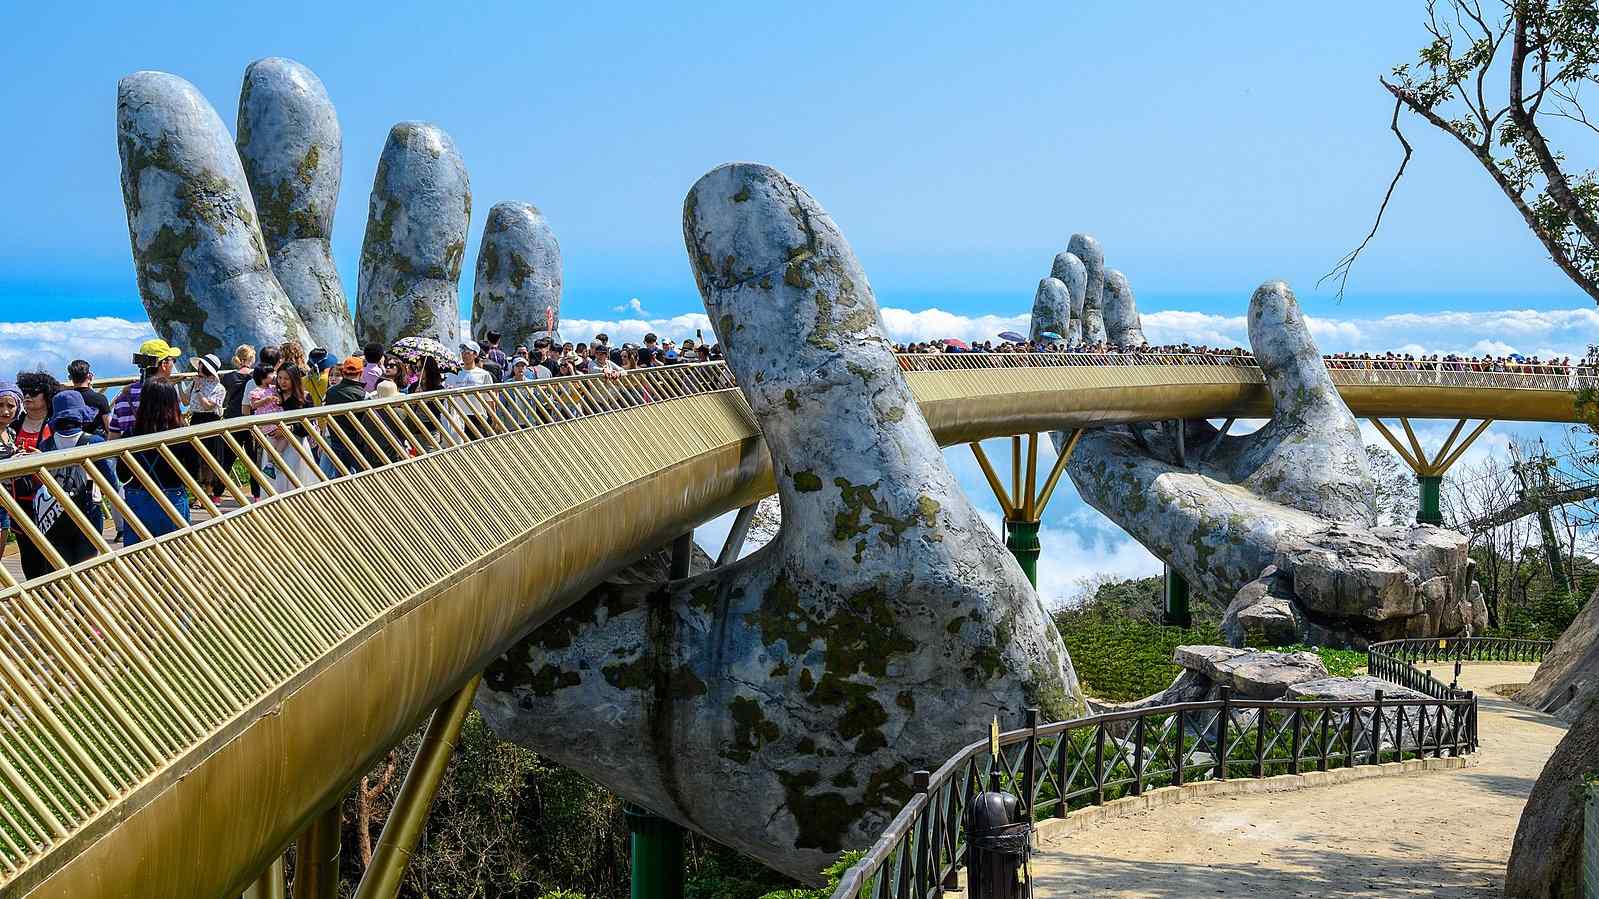 A bridge that was just supposed to help visitors has now become one of the most famous sights in Vietnam!